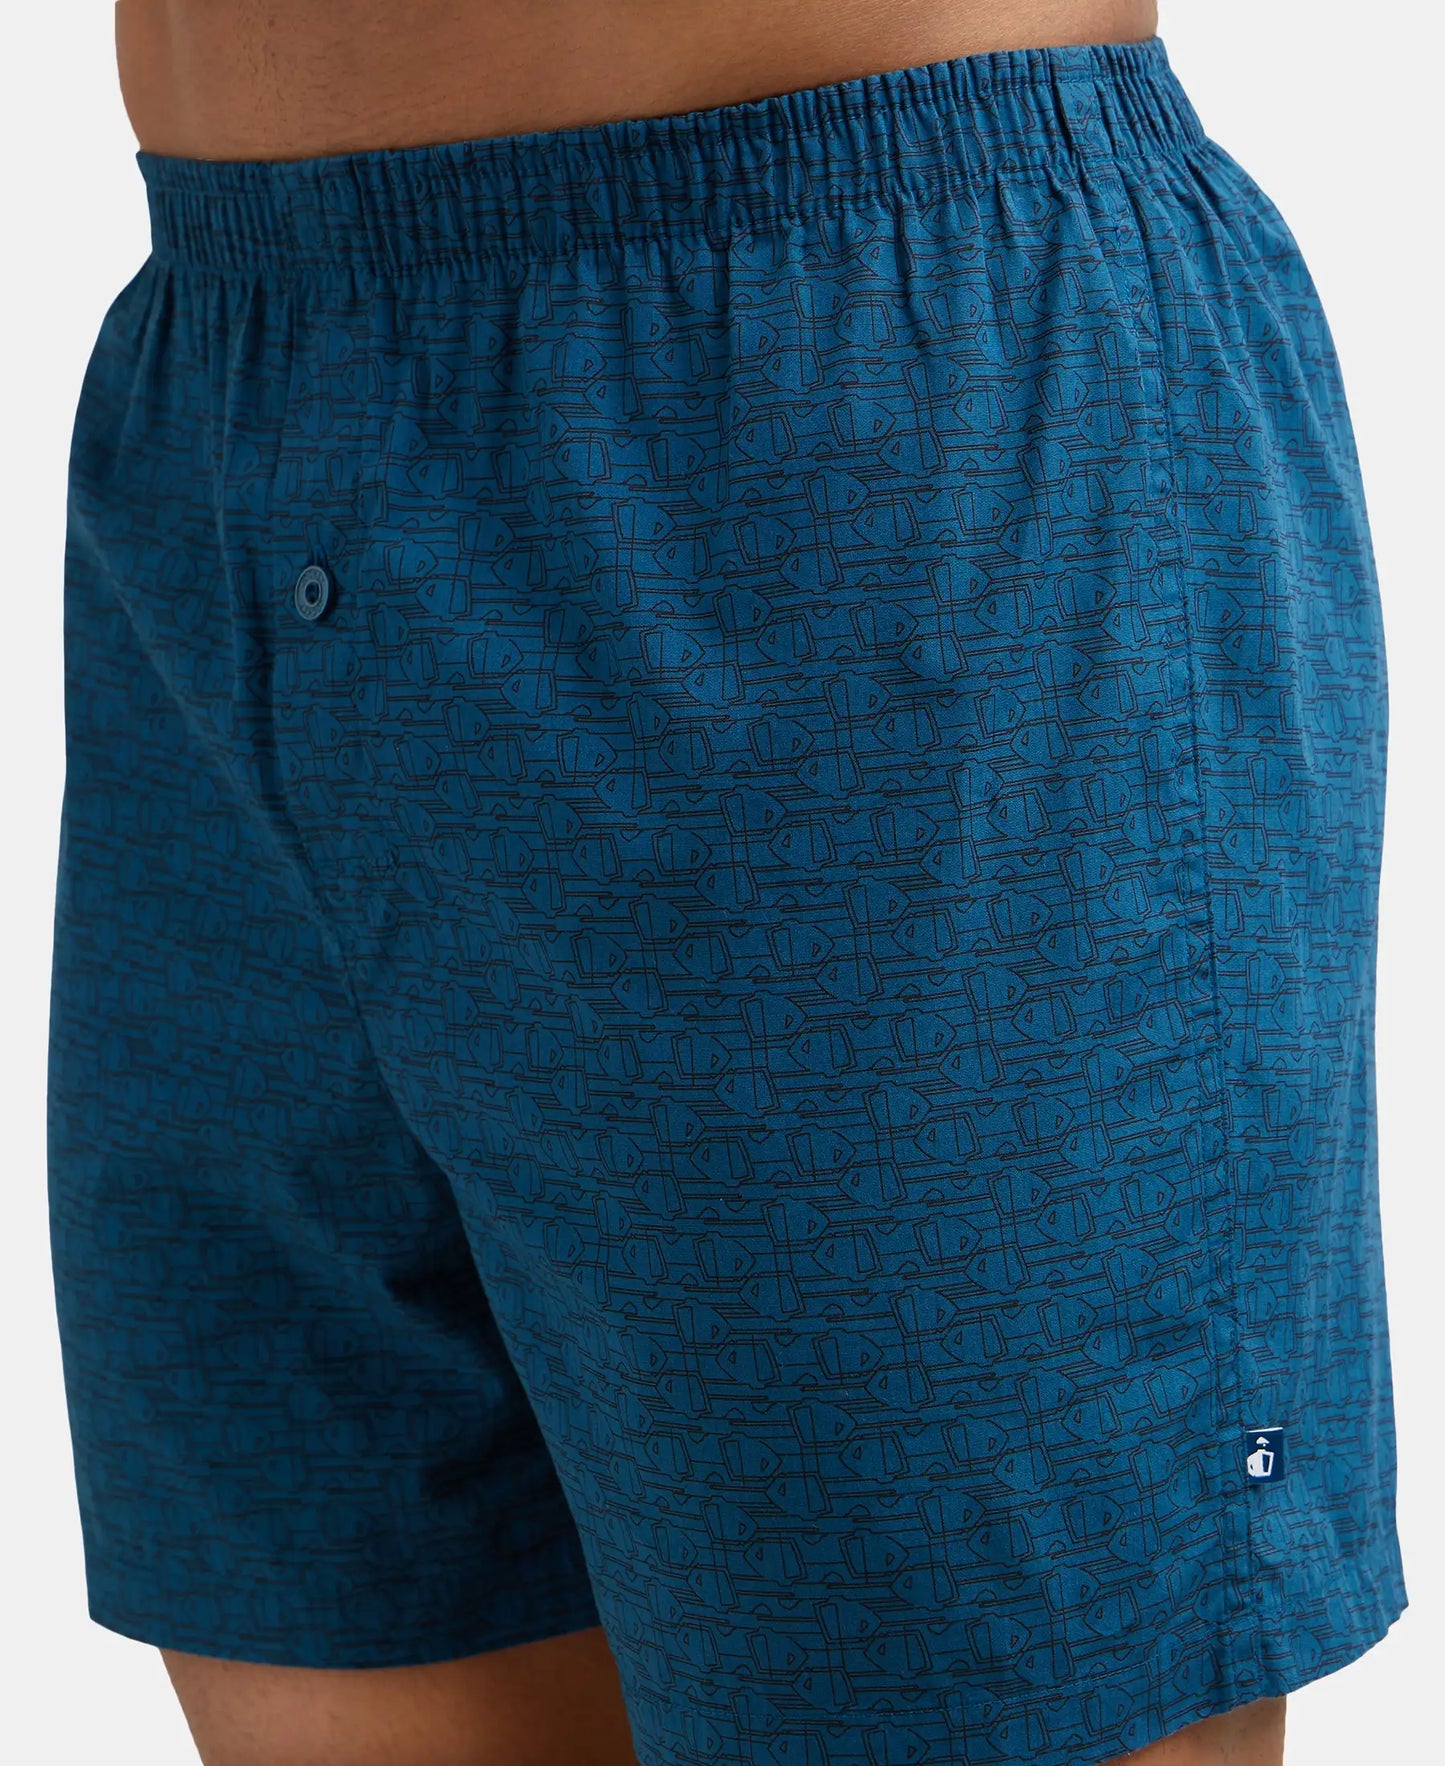 Super Combed Mercerized Cotton Woven Checkered Inner Boxers with Ultrasoft and Durable Inner Waistband - Navy & Seaport Teal-14